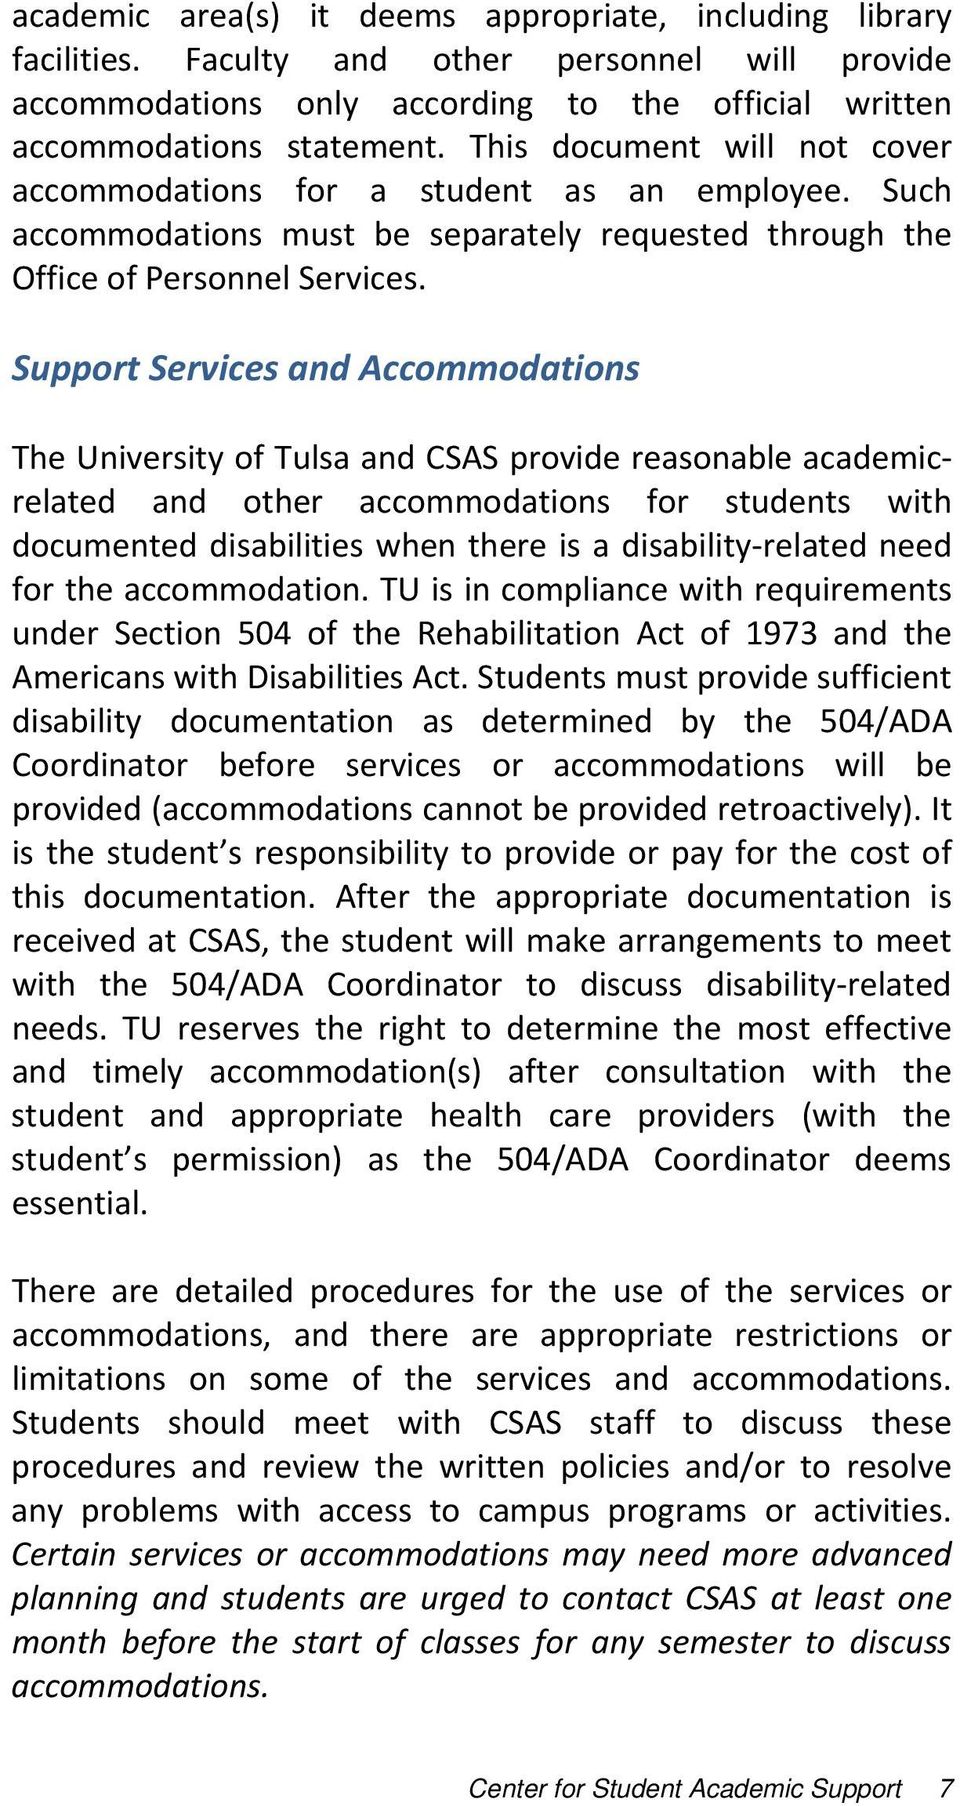 Support Services and Accommodations The University of Tulsa and CSAS provide reasonable academic and other accommodations for students with related documented disabilities when there is a disability